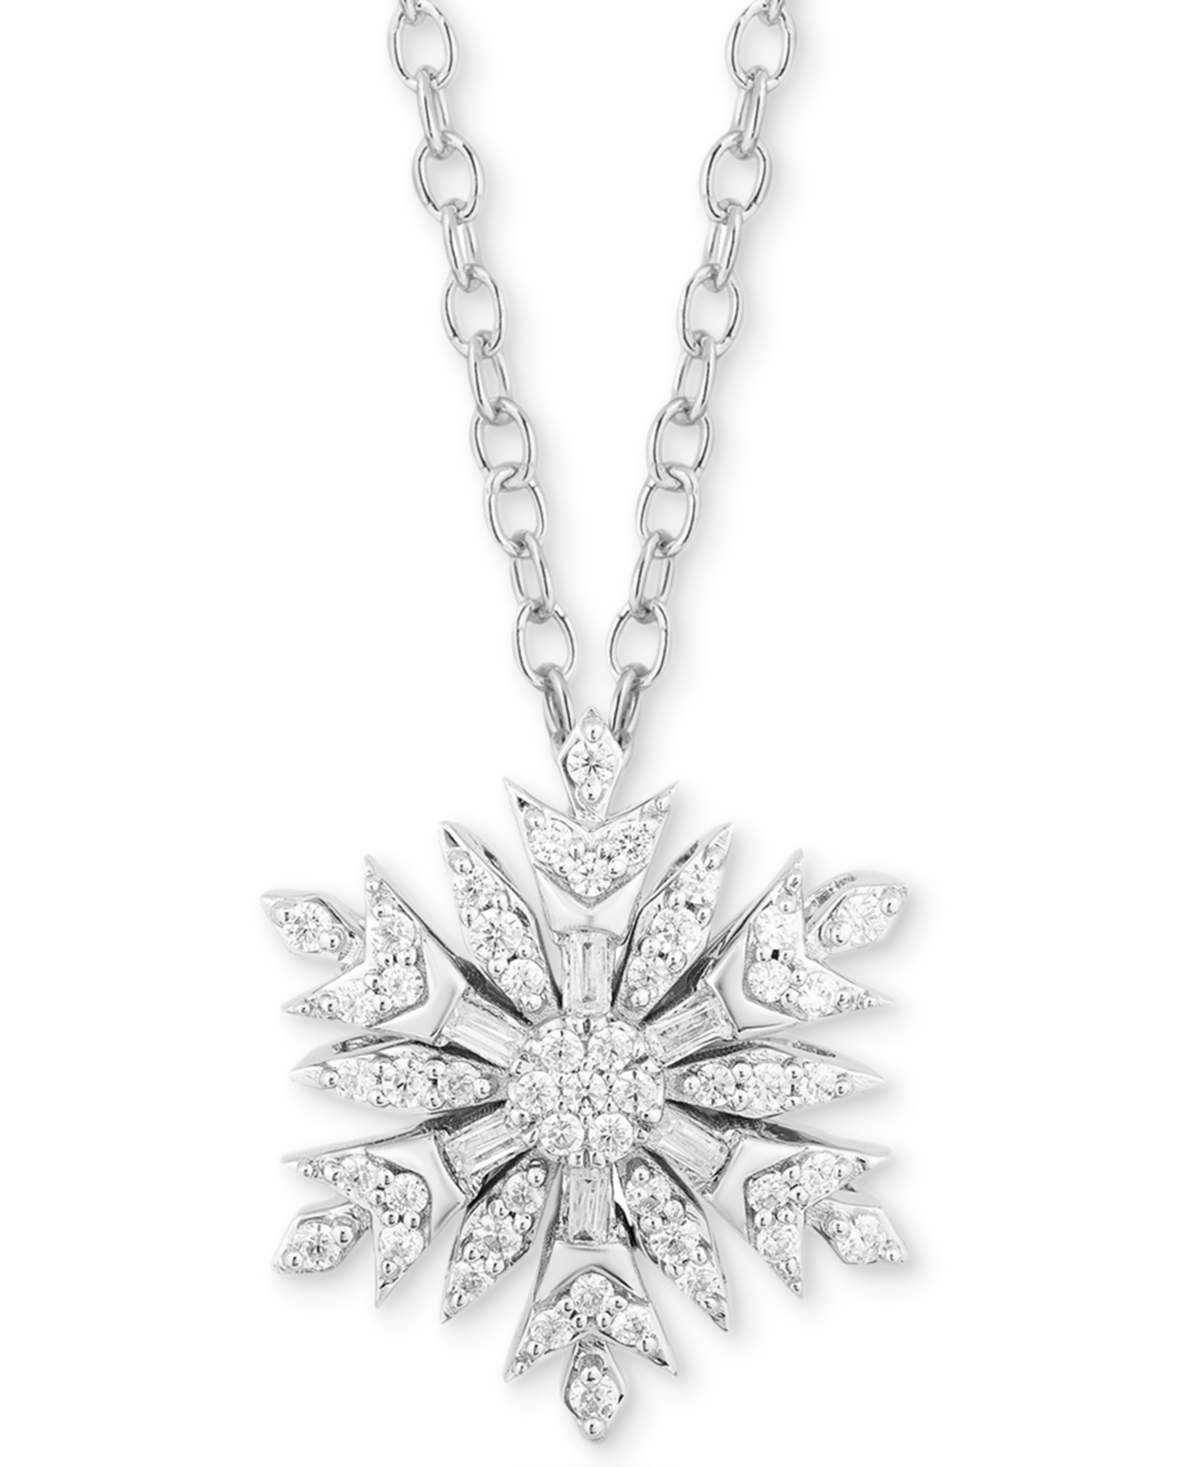 Enchanted Disney Fine Jewelry Diamond Elsa Snowflake Pendant Necklace (1/4 ct. t.w.) in Sterling Silver, 16" + 2" extender